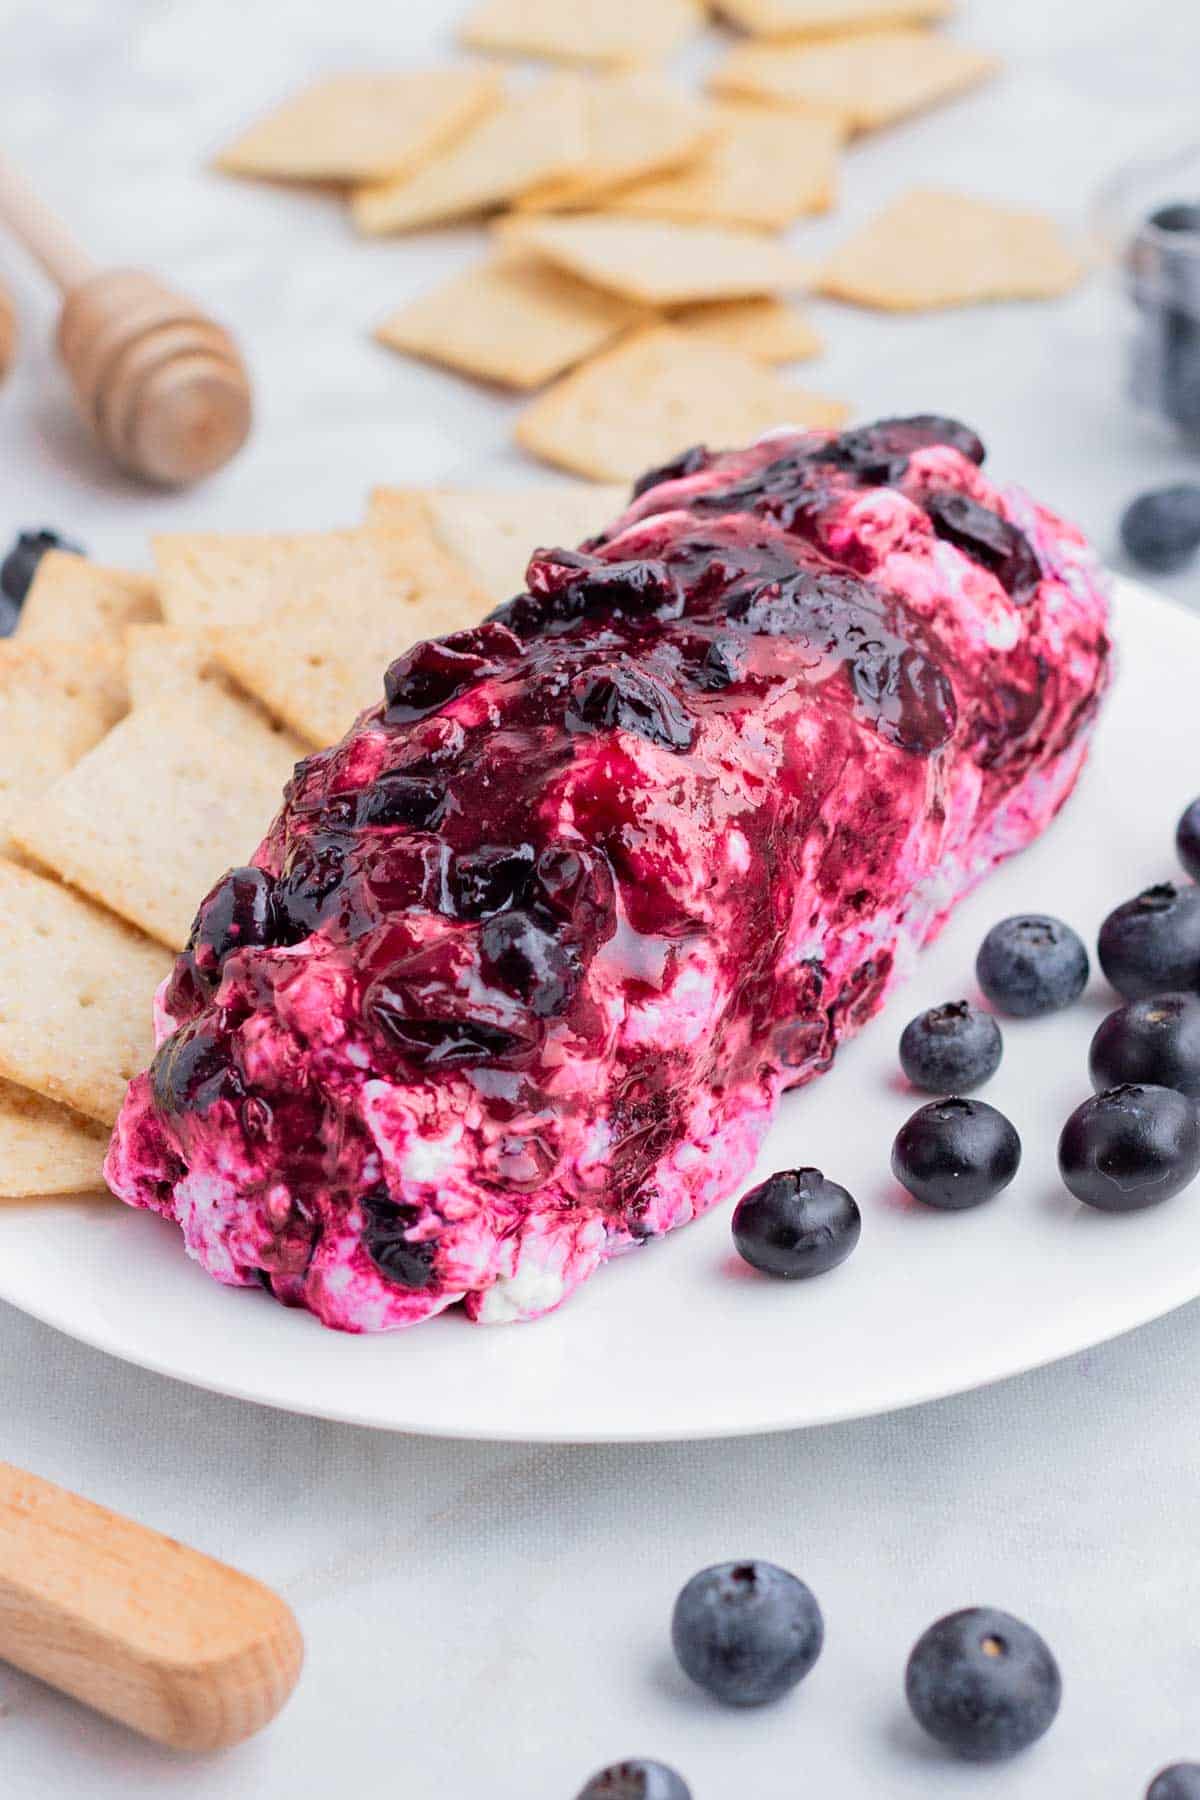 Blueberry goat cheese is served alongside crackers on a white plate.